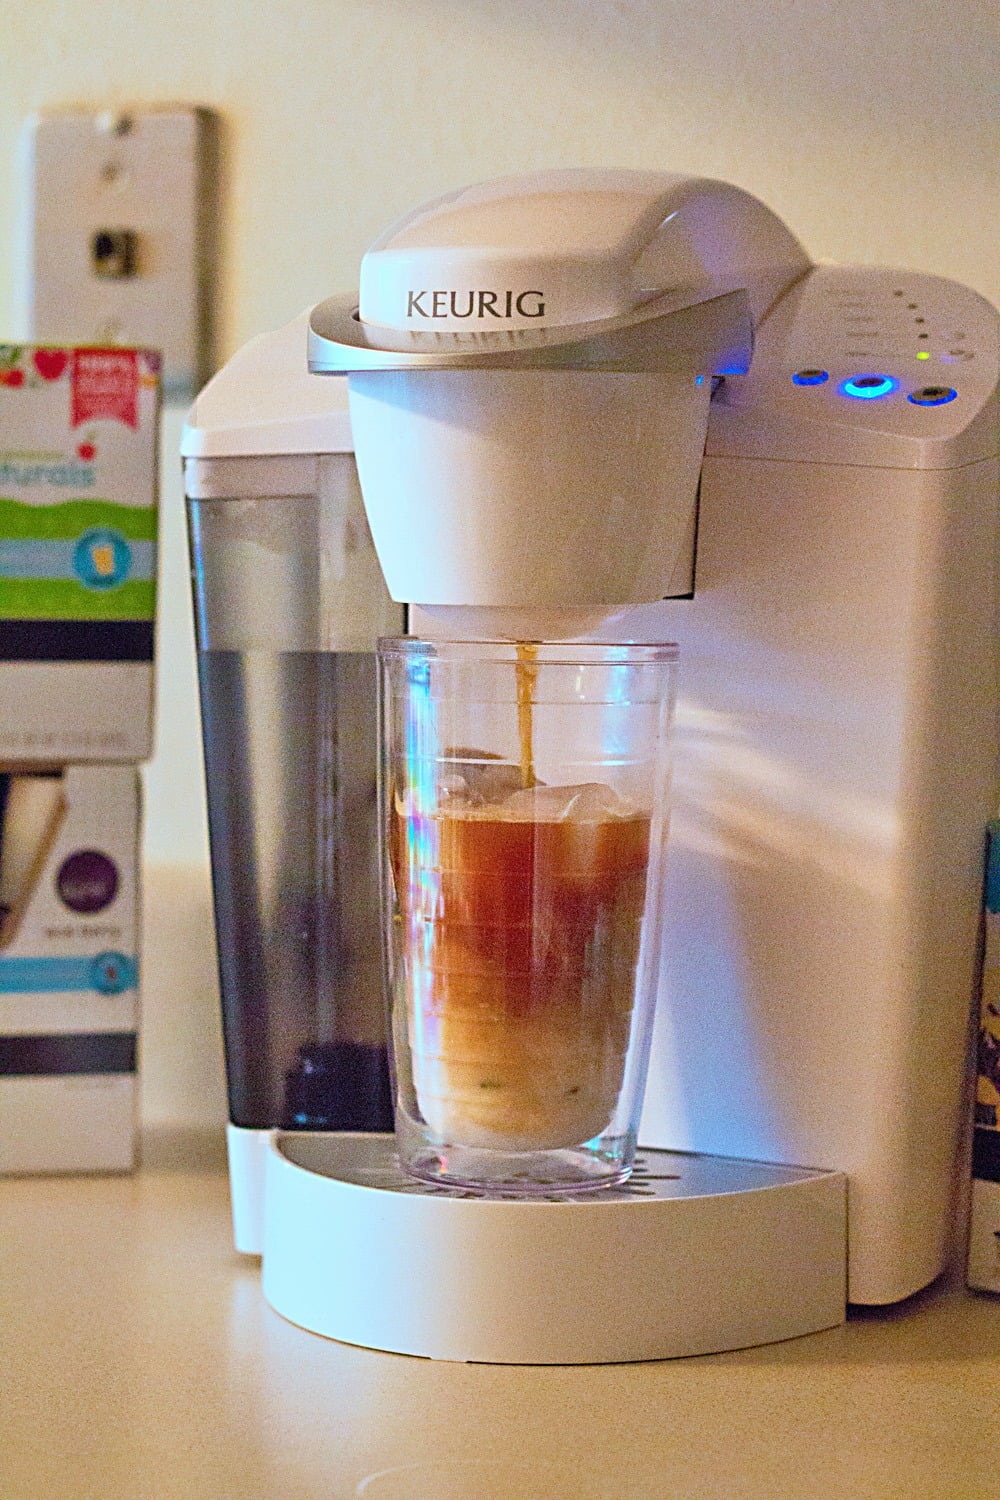 How to Make Iced Coffee with a Keurig® Coffee Maker (Two Ways